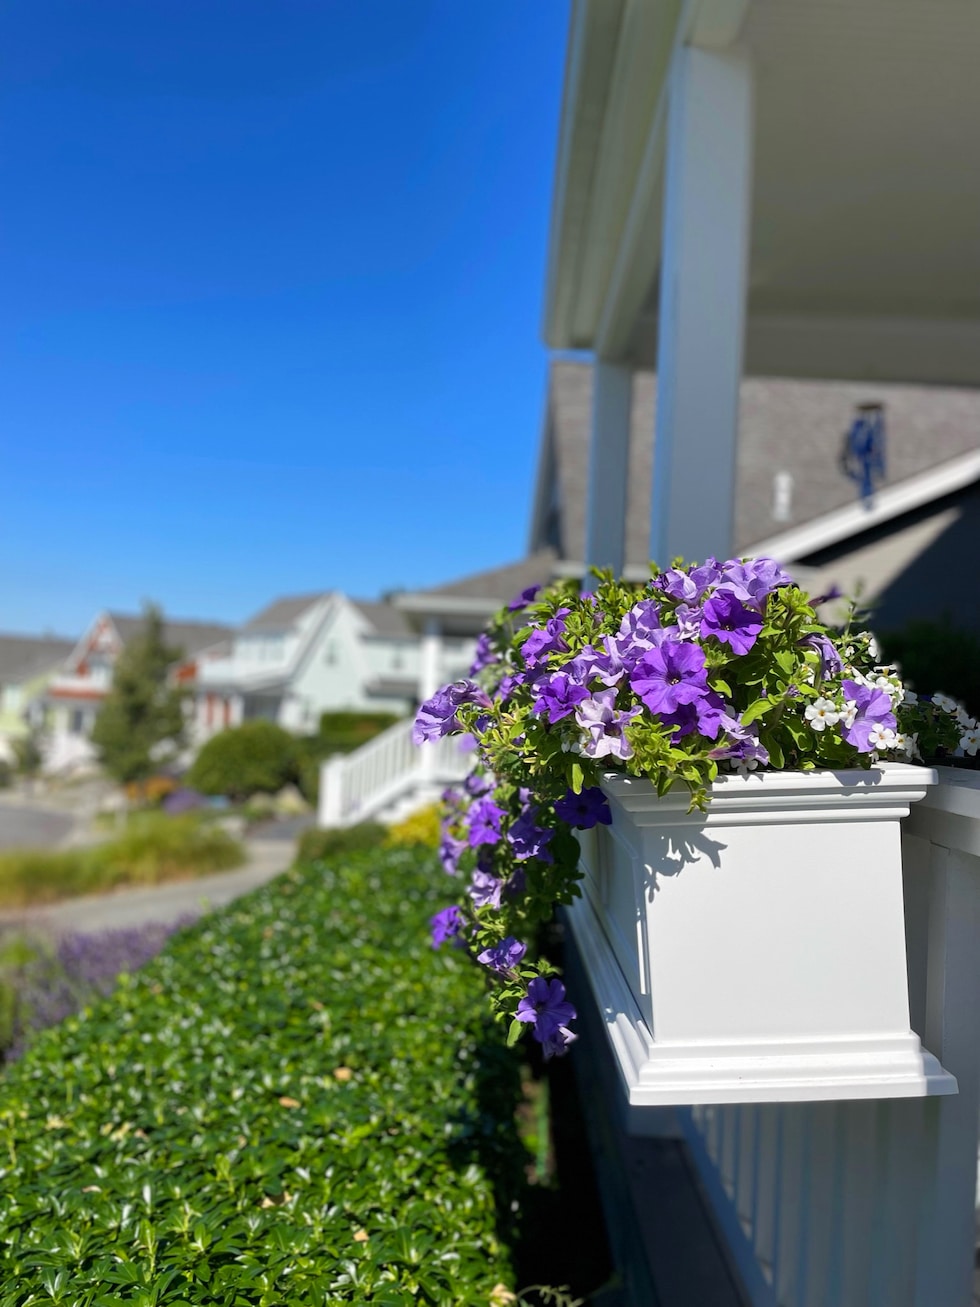 Our Railing Planter Boxes - Curb Appeal